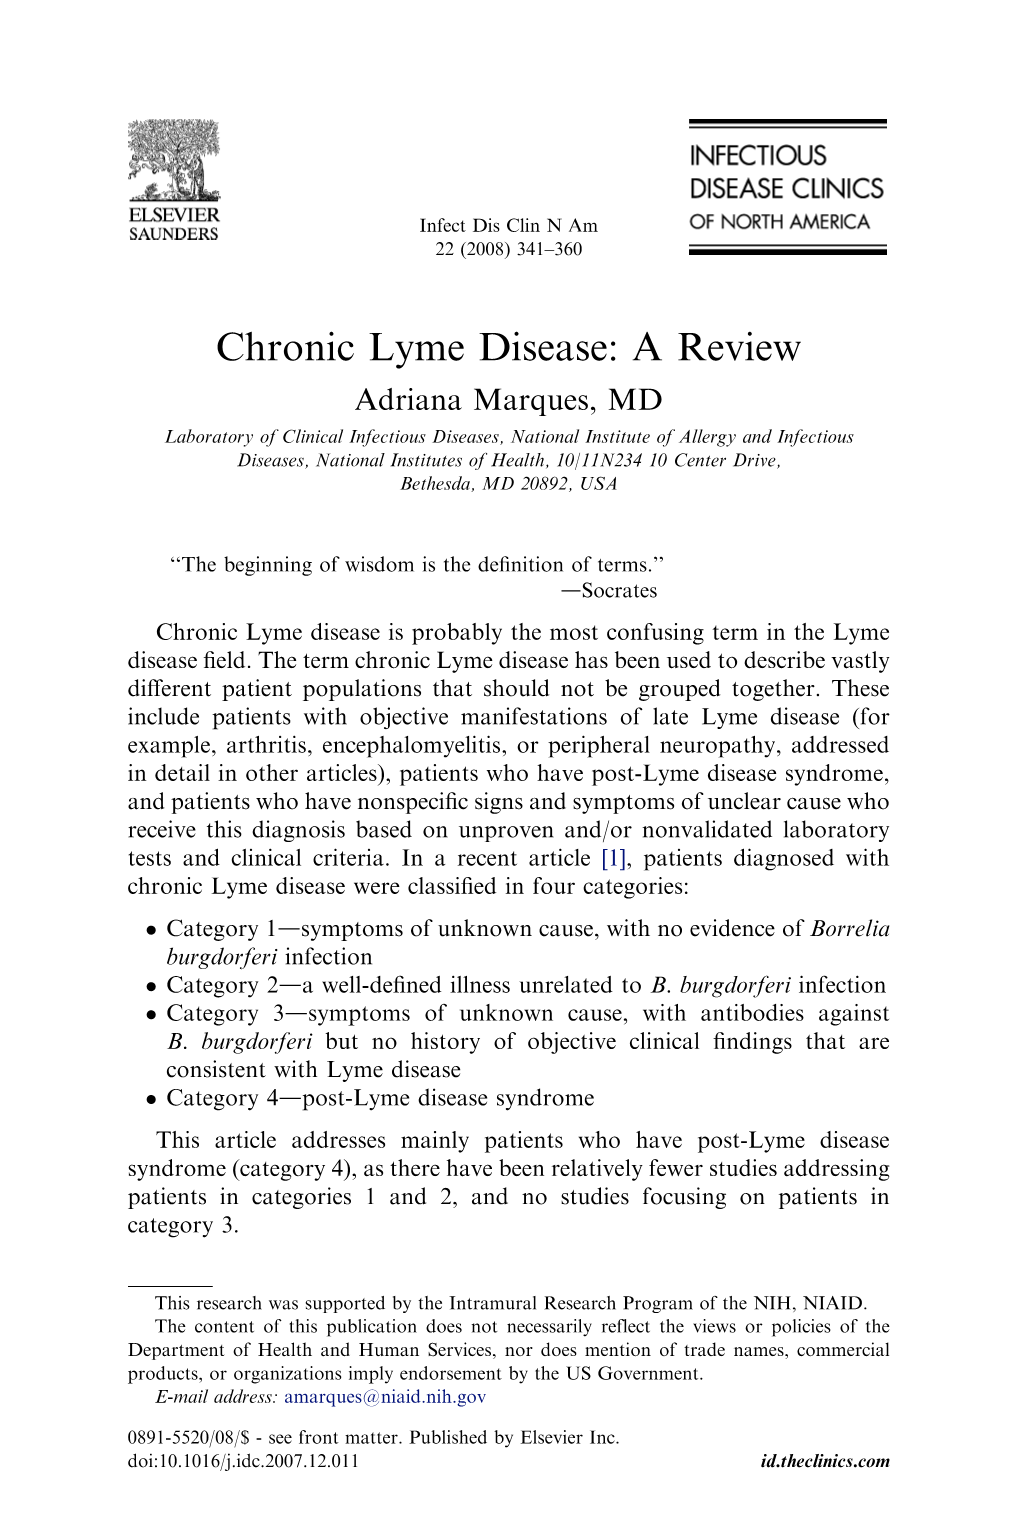 Chronic Lyme Disease: a Review